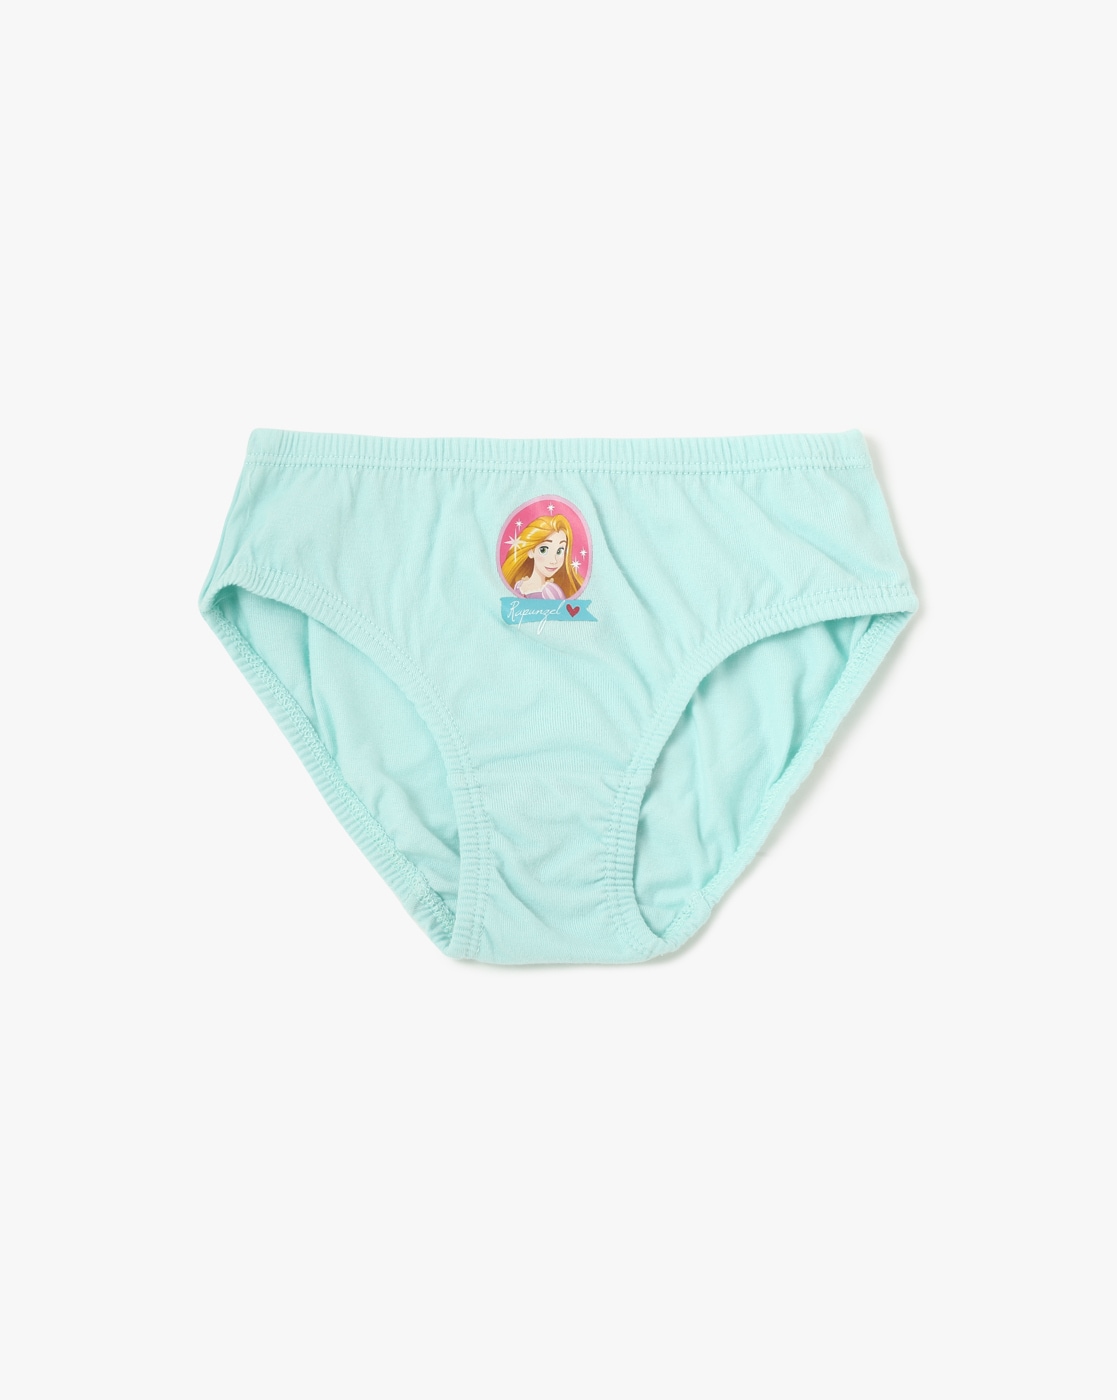 Ariel Panty For Girls Price in India - Buy Ariel Panty For Girls online at